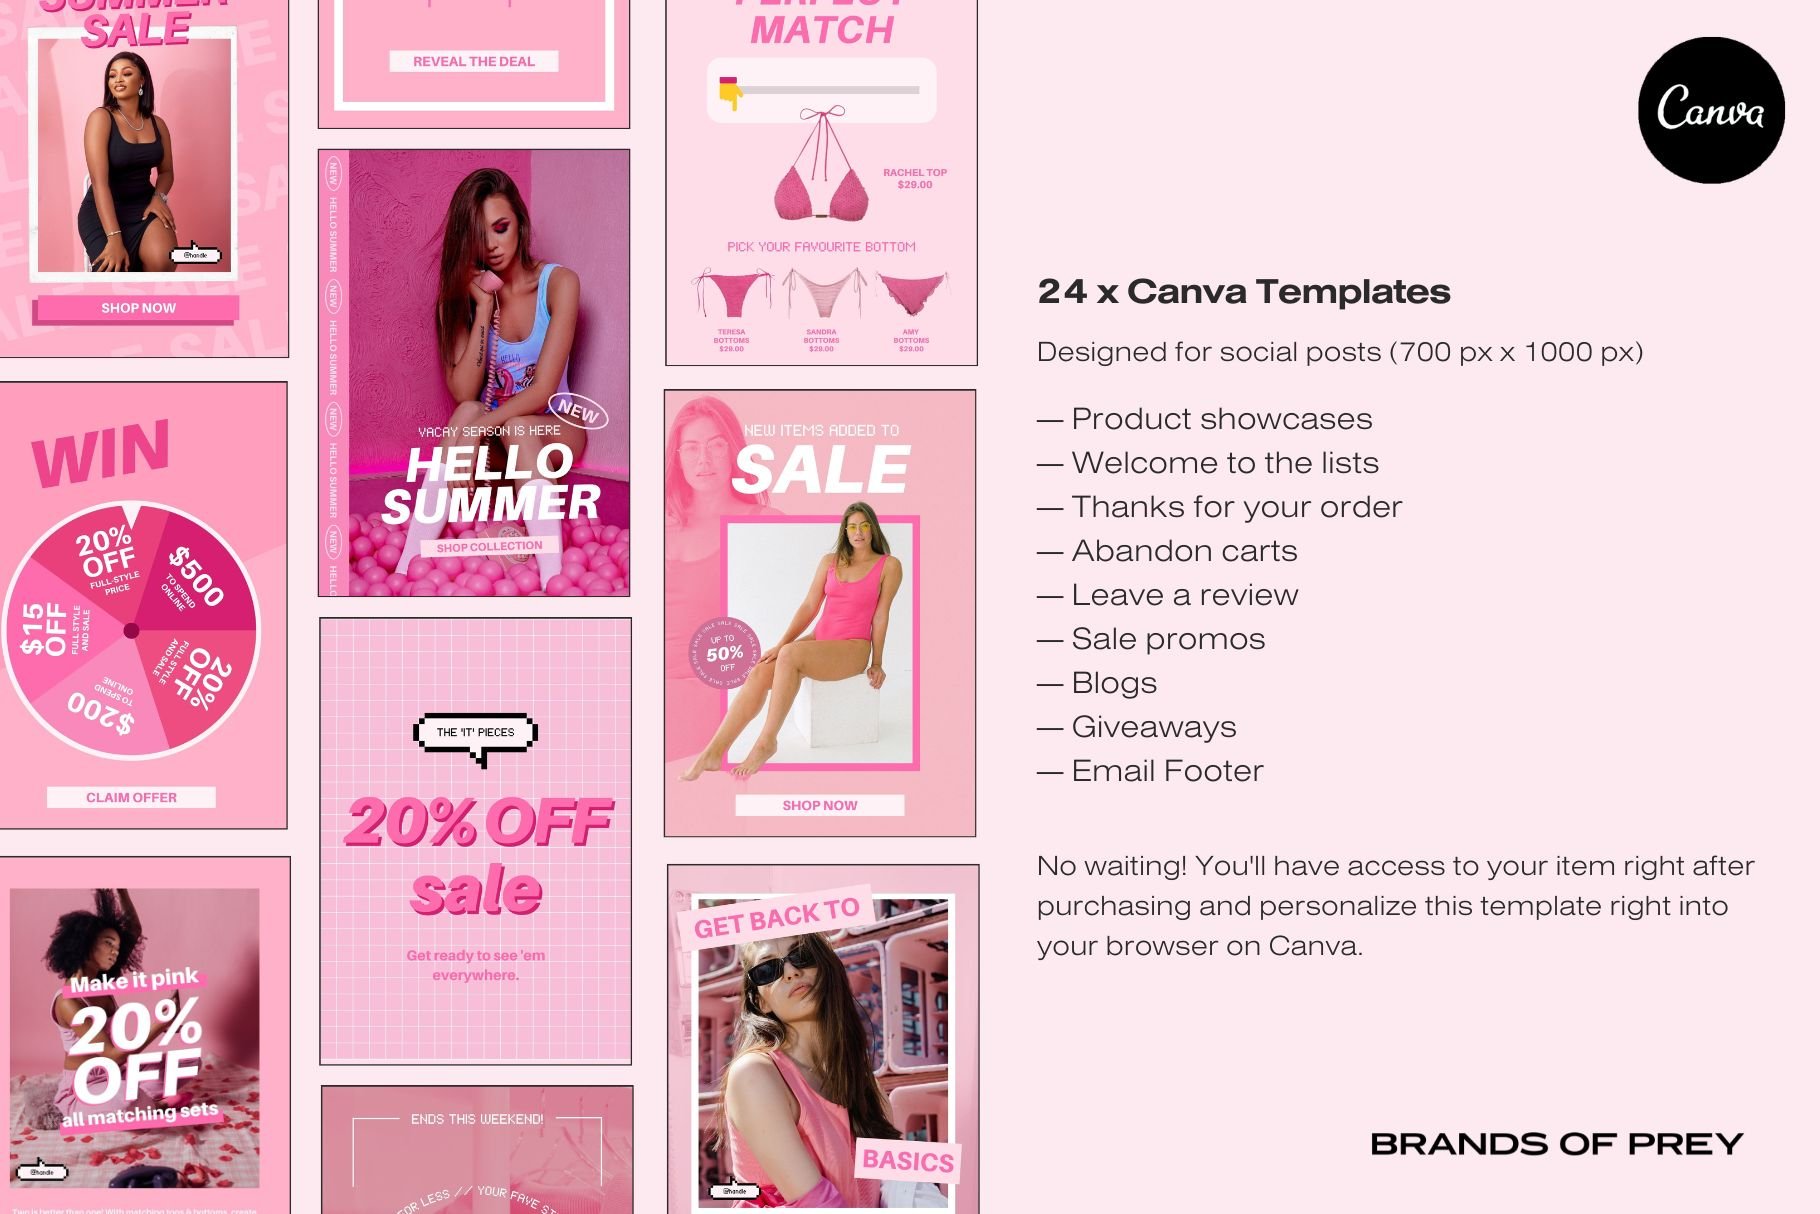 Some features of this pink template.